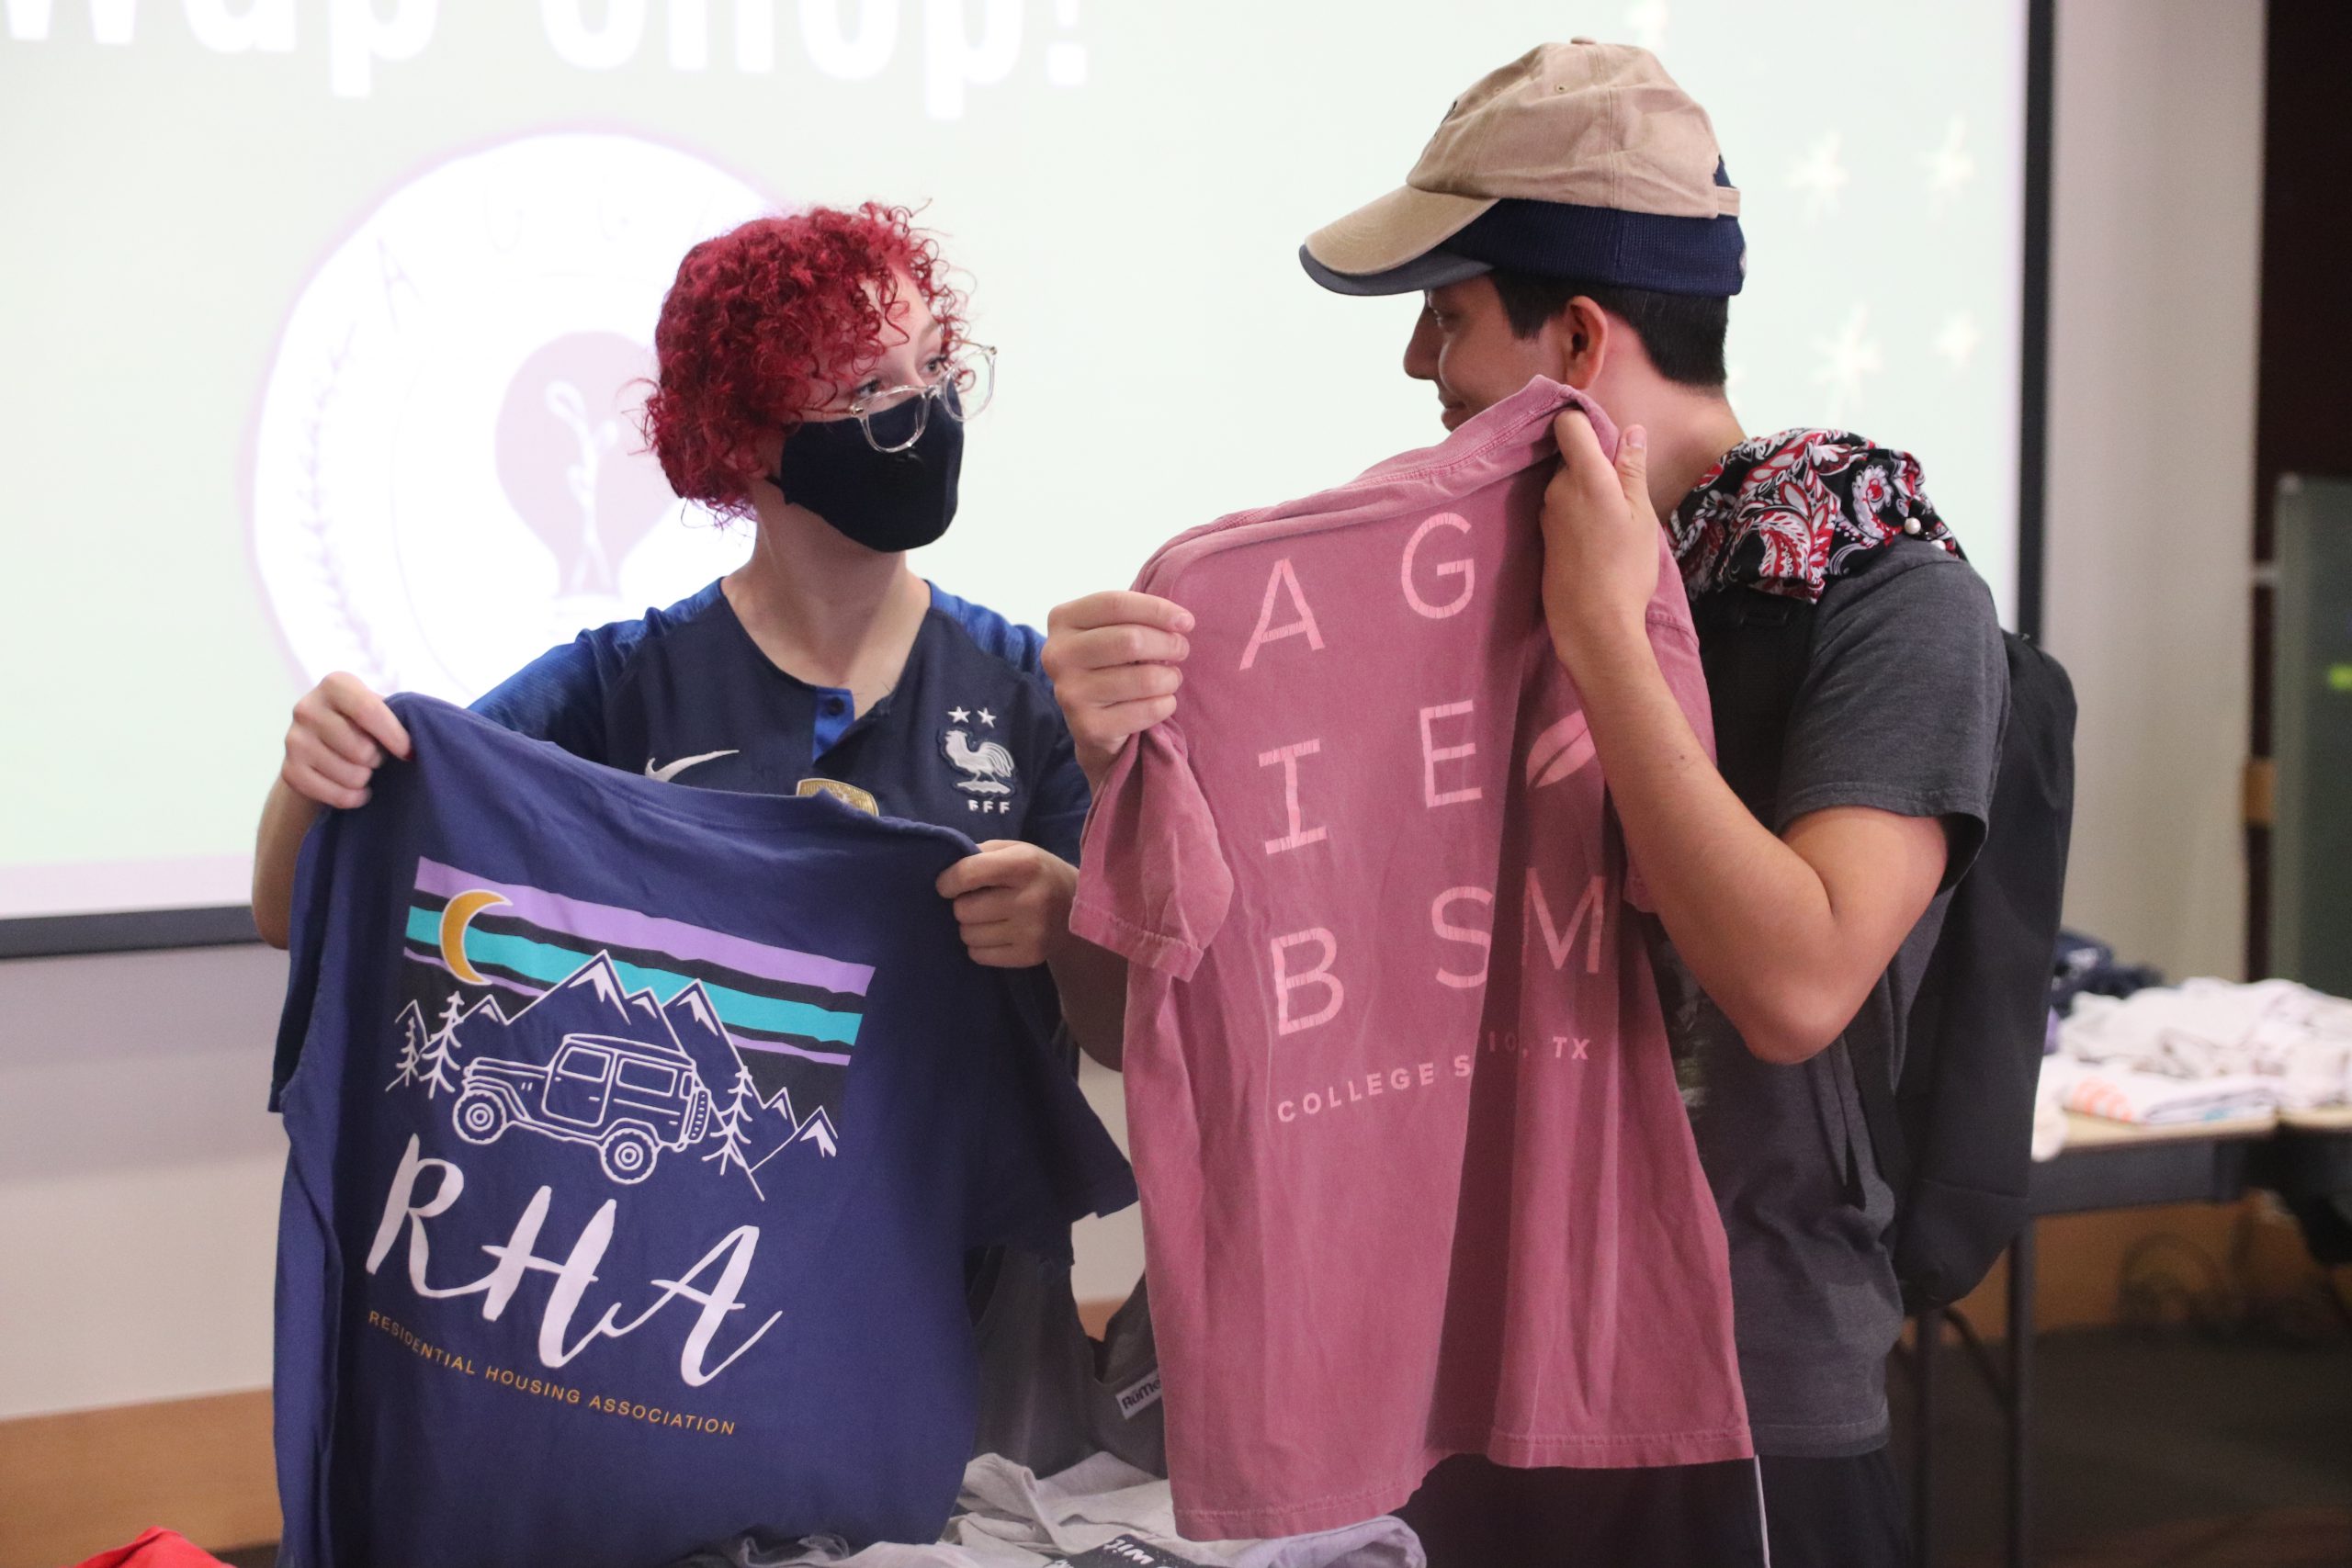 Swap Shop photo of two students holding t-shirts